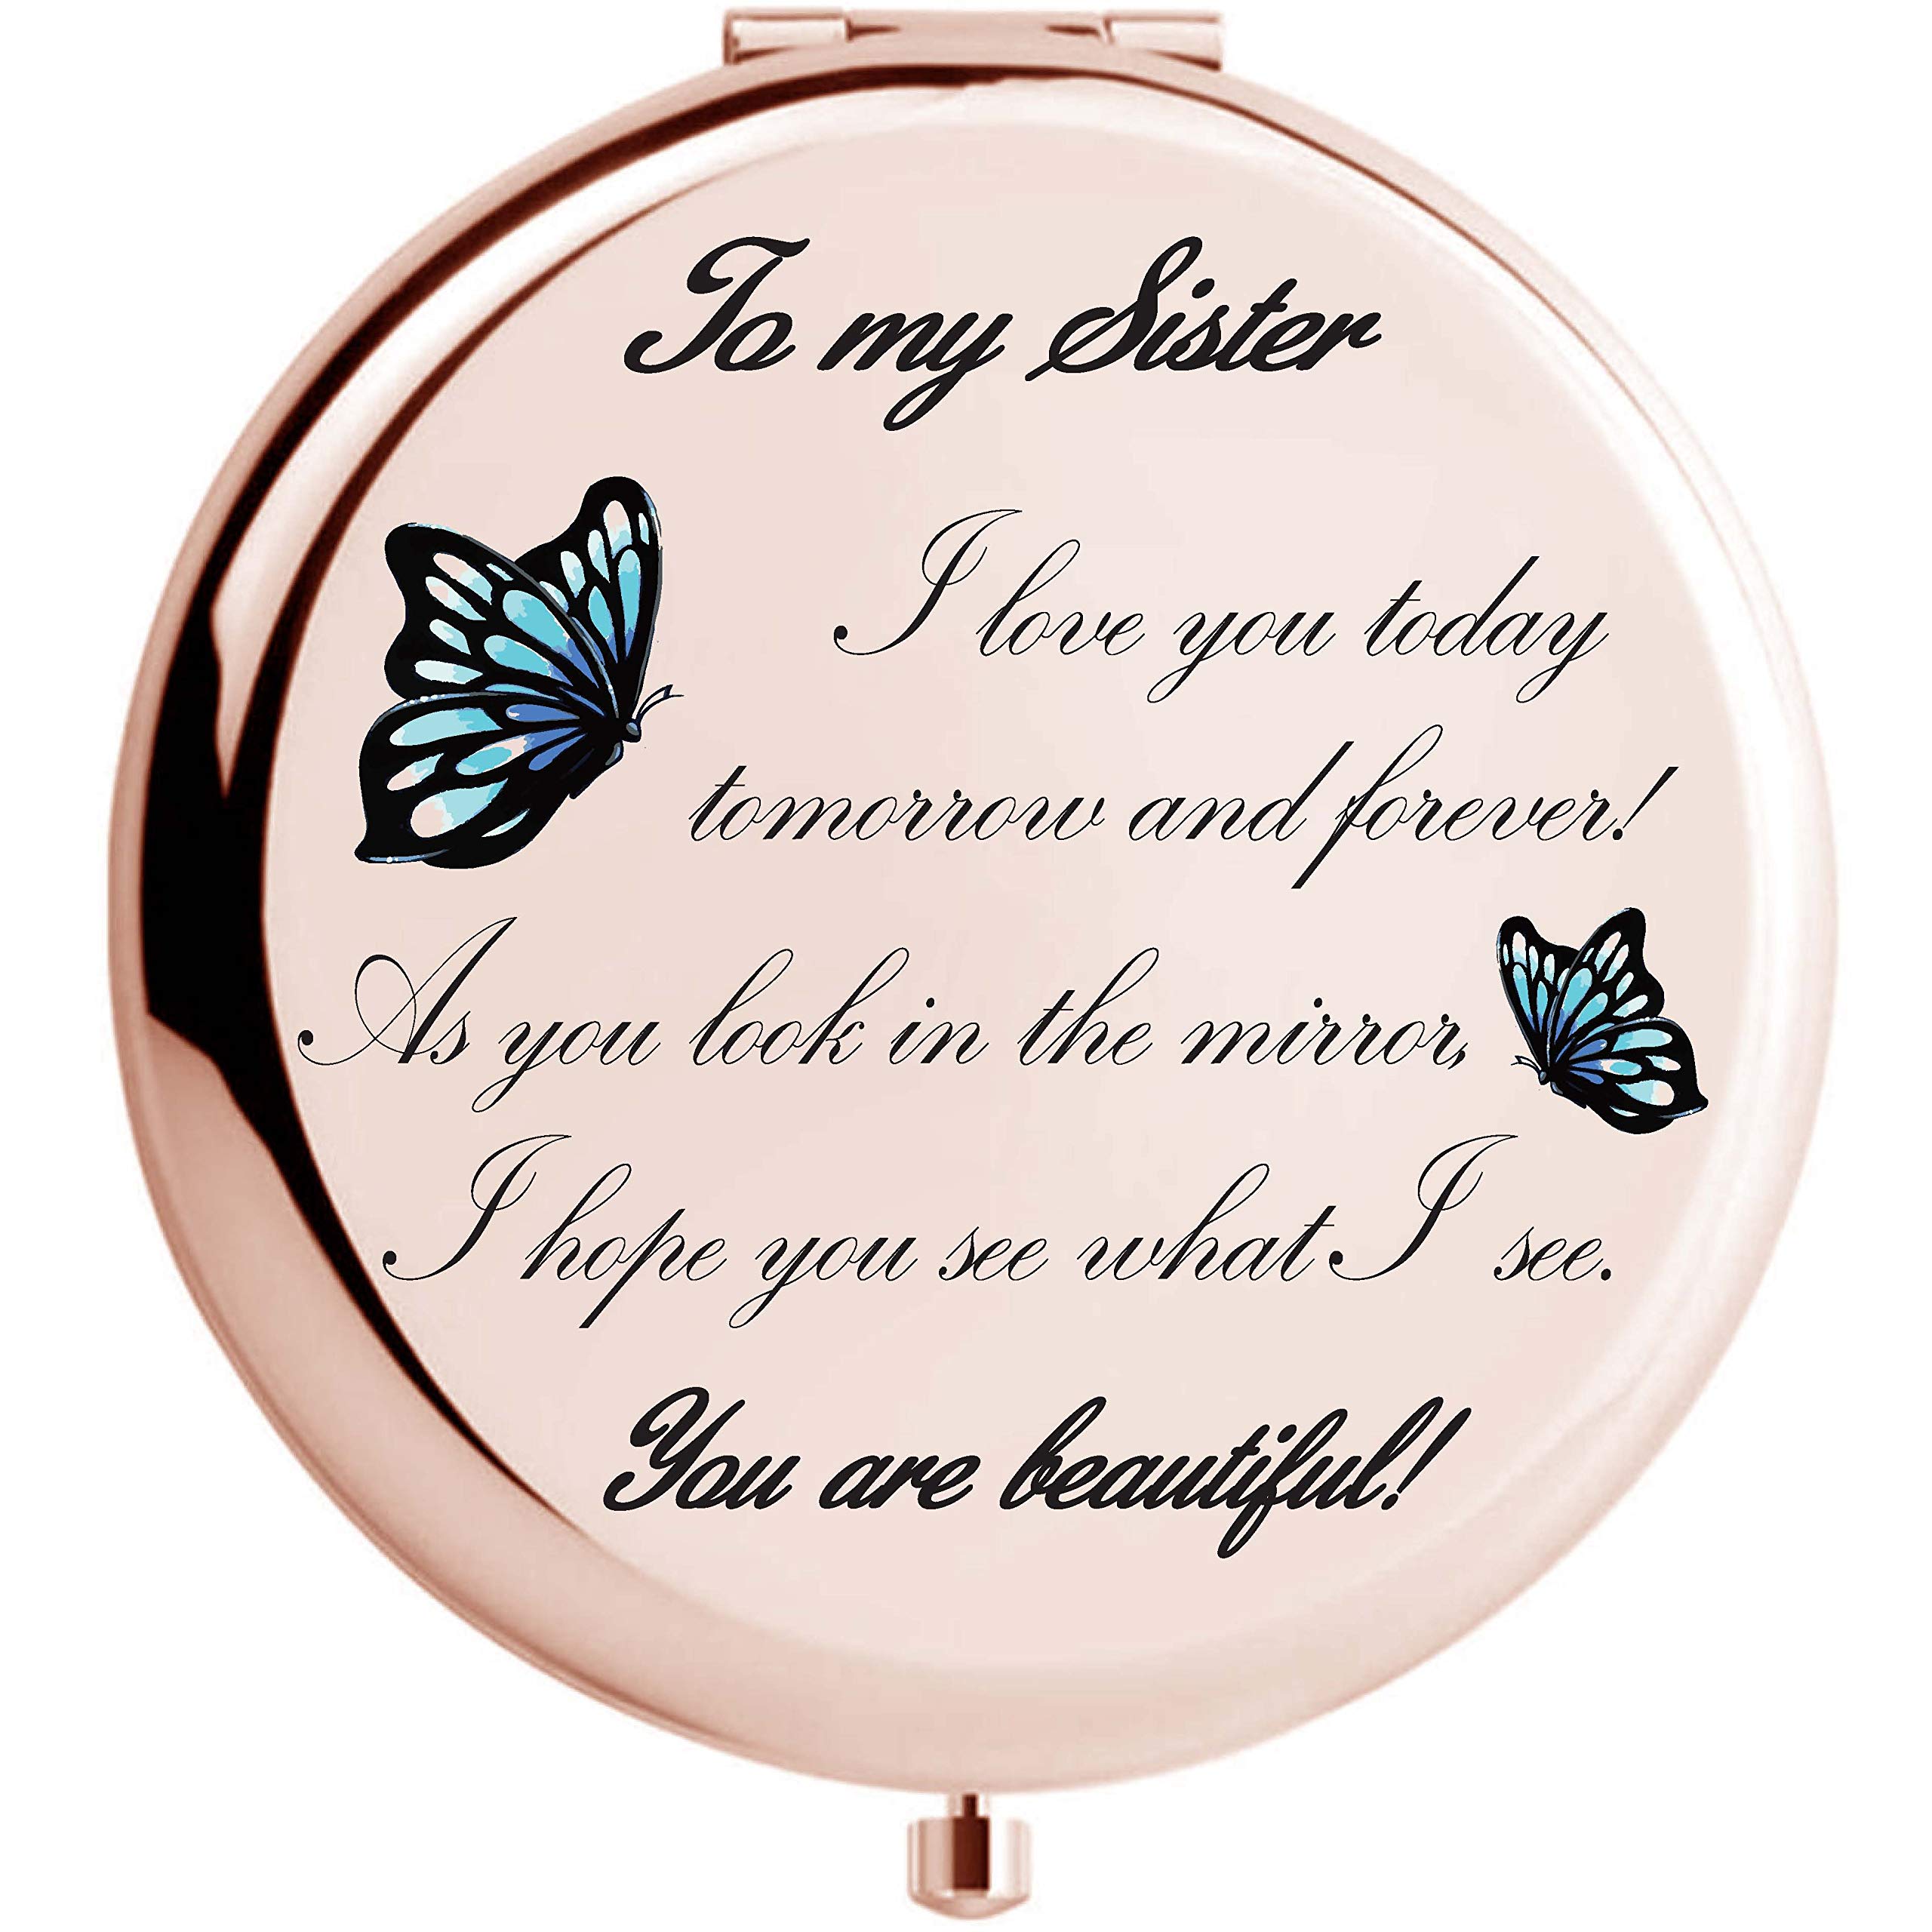 Sisters Gifts from Sister, Brother - Gifts for Sister - Sister Birthday  Gift Ideas, Birthday Gifts for Sister - Sister Christmas Gifts, Christmas